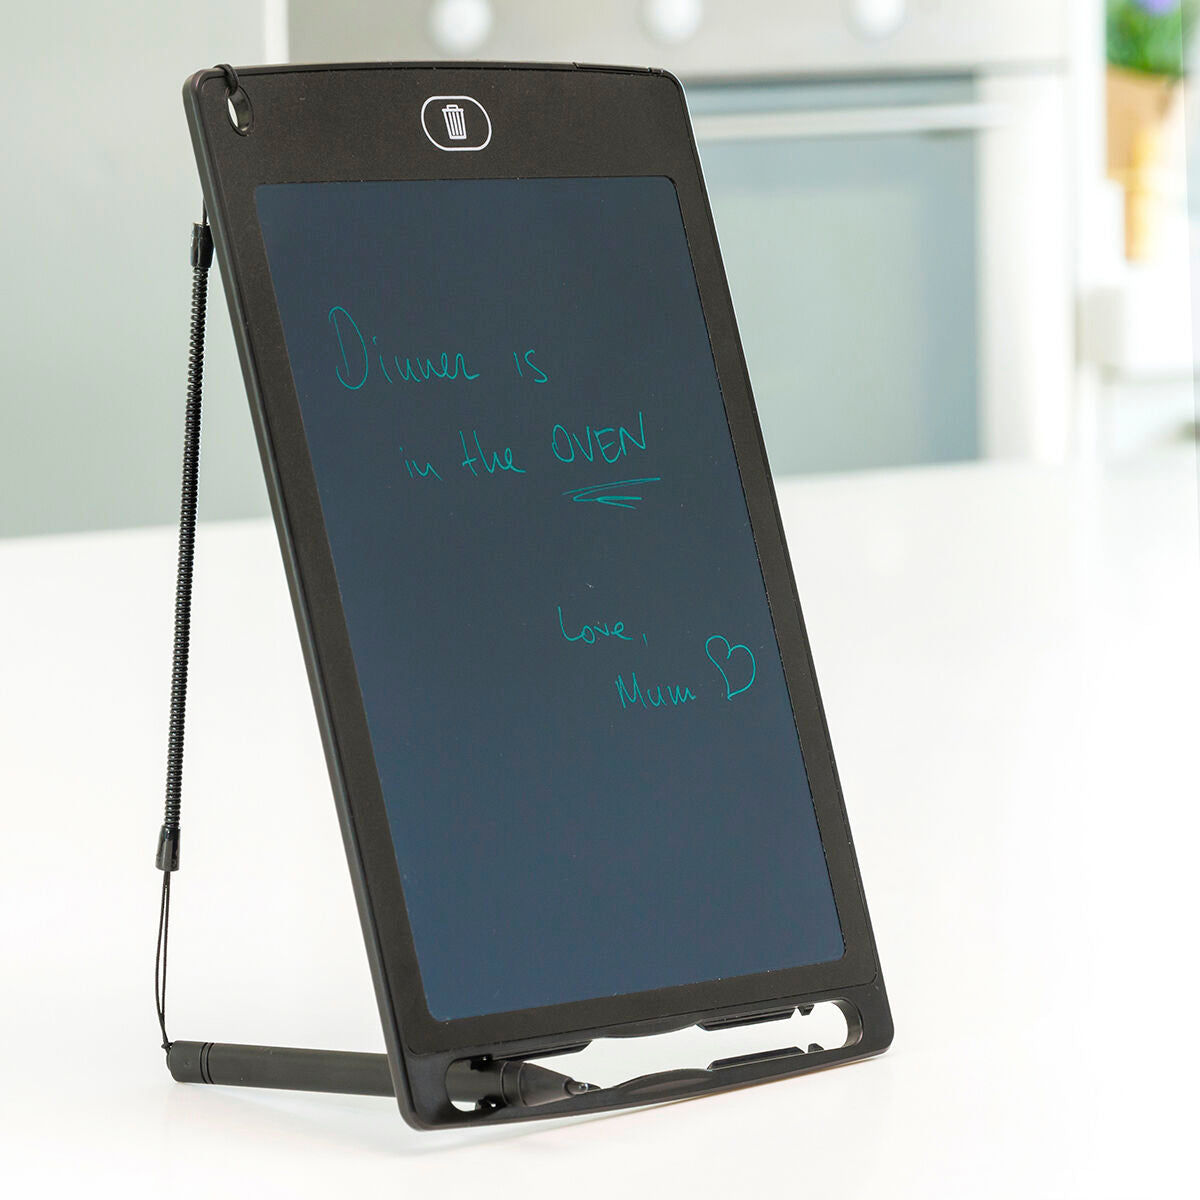 InnovaGoods Magic Drablet LCD Writing and Drawing Tablet